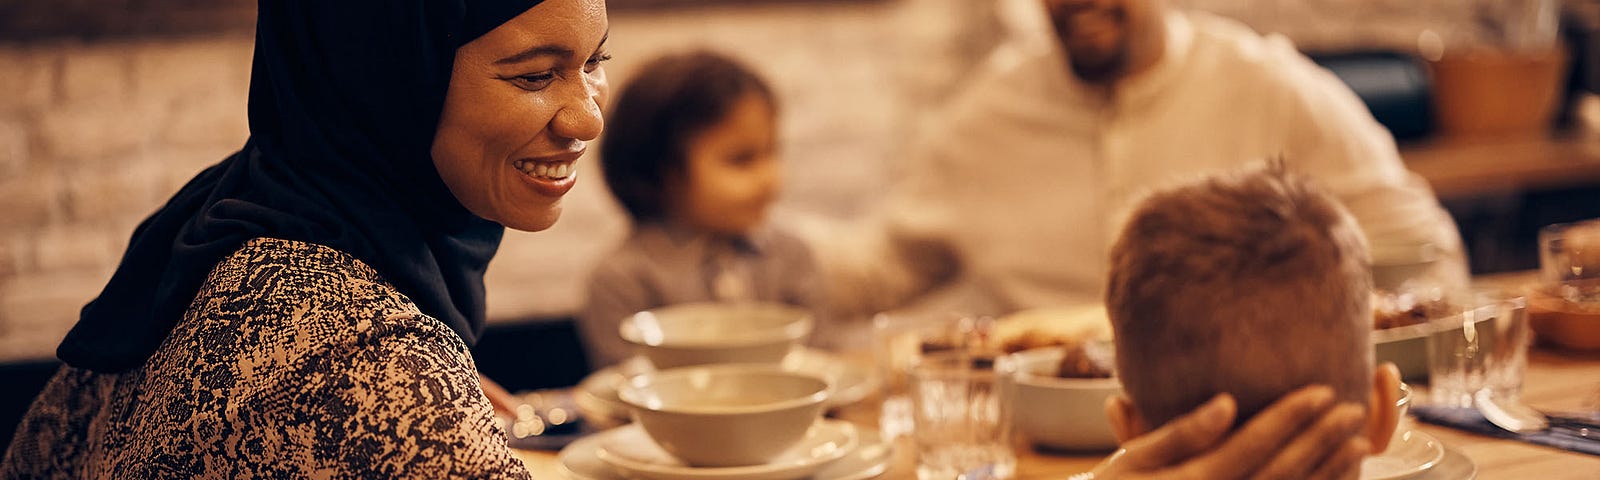 A woman is smiling at the table with her children and partner during evening mealtime.